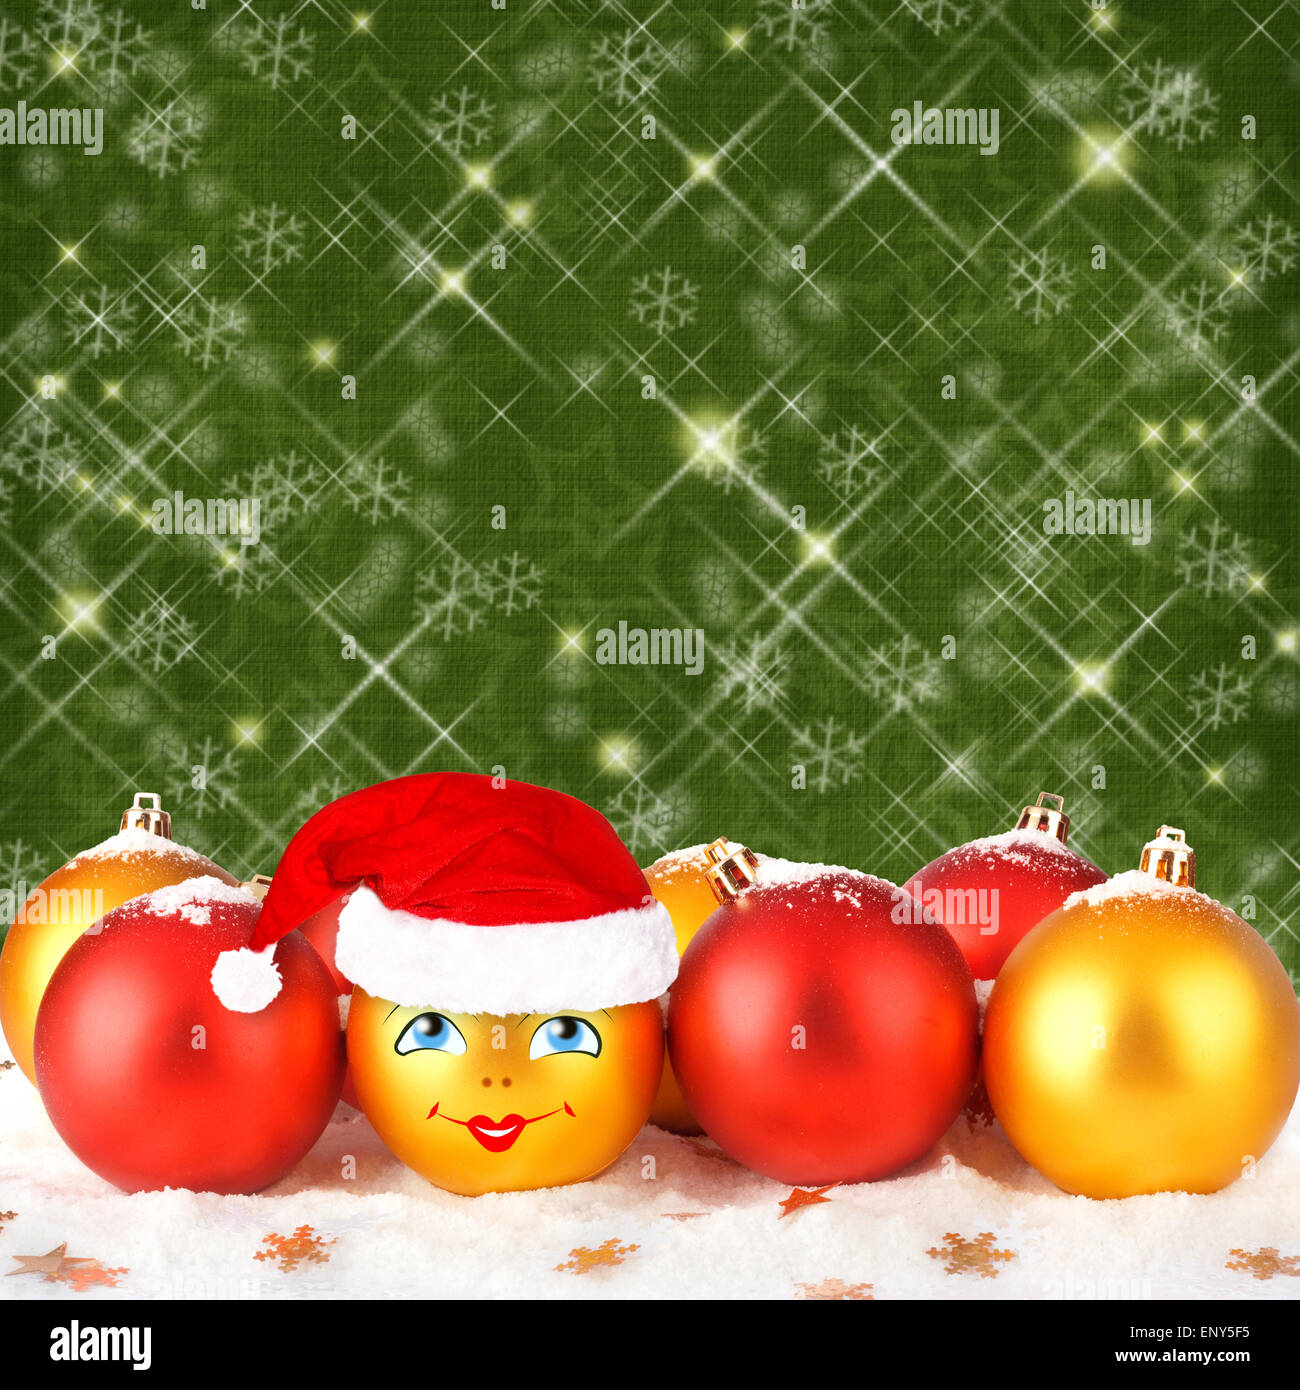 Christmas ball in the hat of Santa Claus  on the abstract background with stars Stock Photo